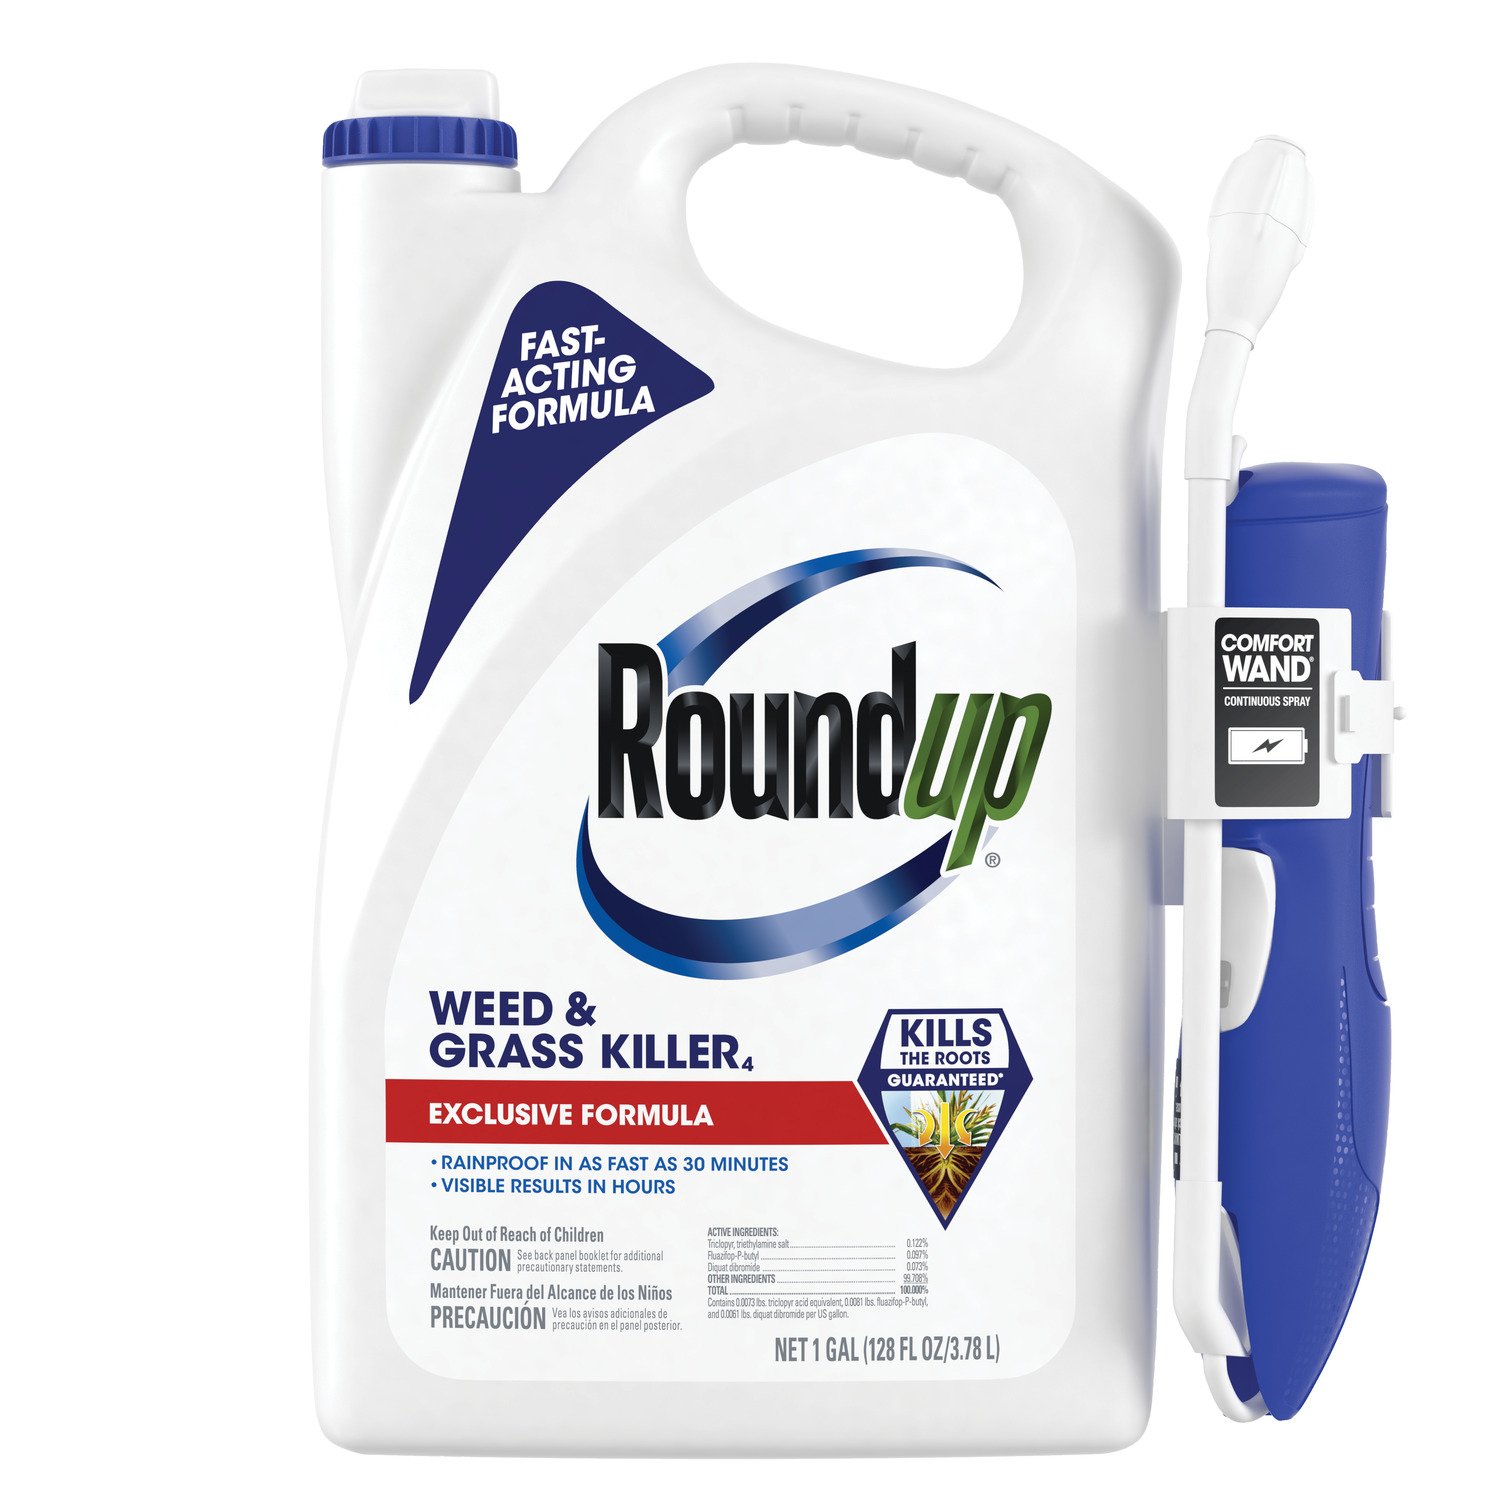 Roundup Weed & Grass Killer Ready-to-Use, 1 Gallon Bottle with Wand